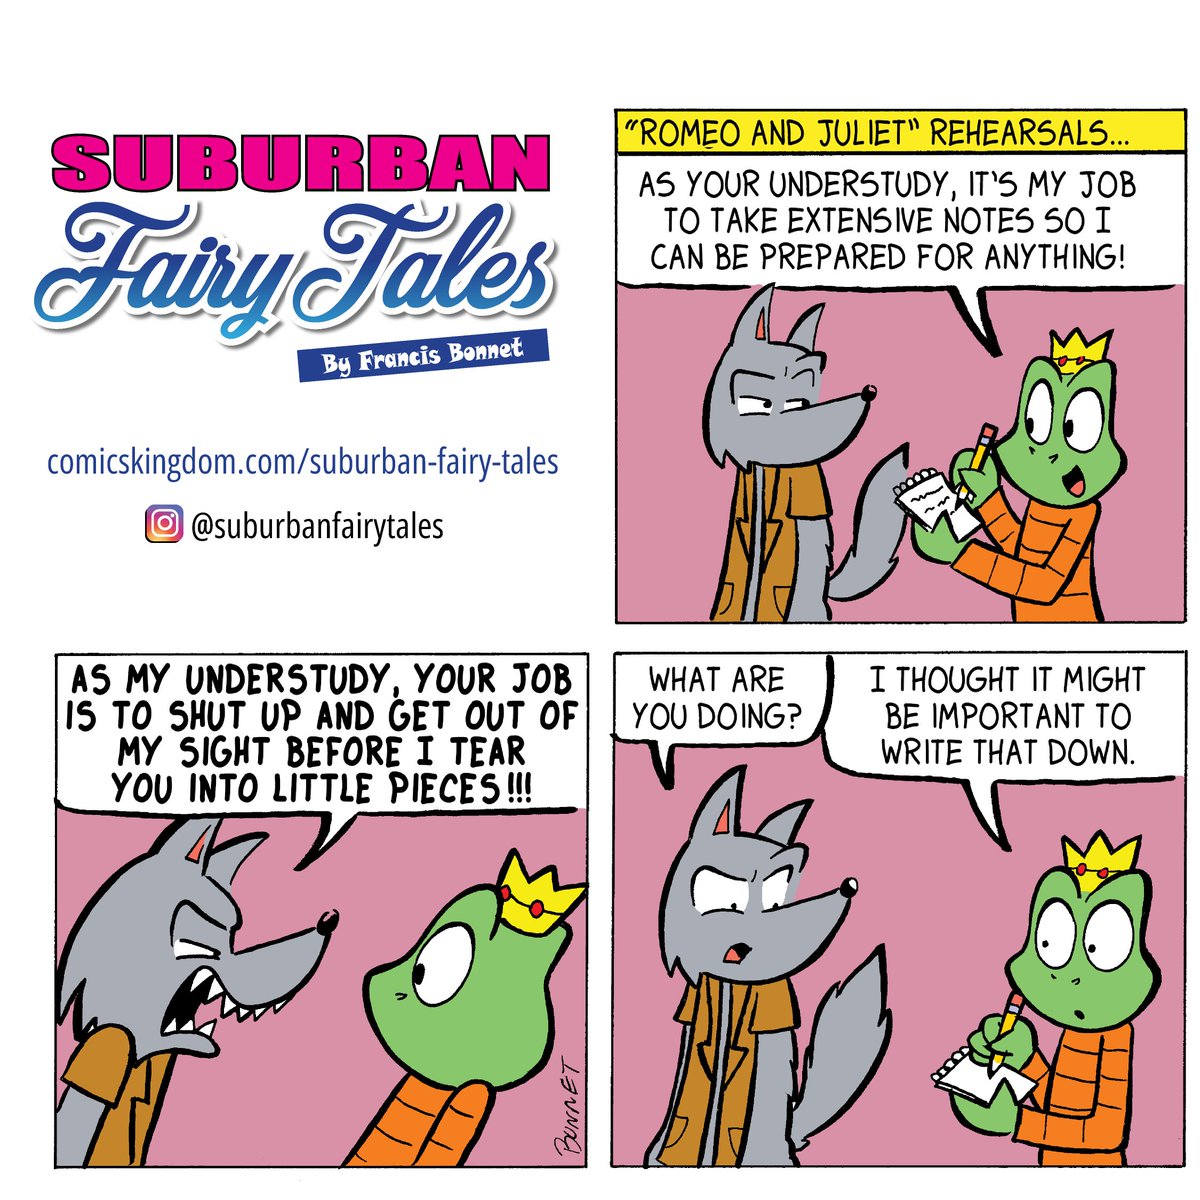 This comic is from Sept 2016. This story probably had the biggest exchange of words ever for Wolf & FrogPrince!
#comicstrips #instacomic #fairytaleretelling #funnycomics #cartoonpig #comicsforkids #igcomics #humor #instaartists #understudy #yelling #writeitdown #anger #takenotes